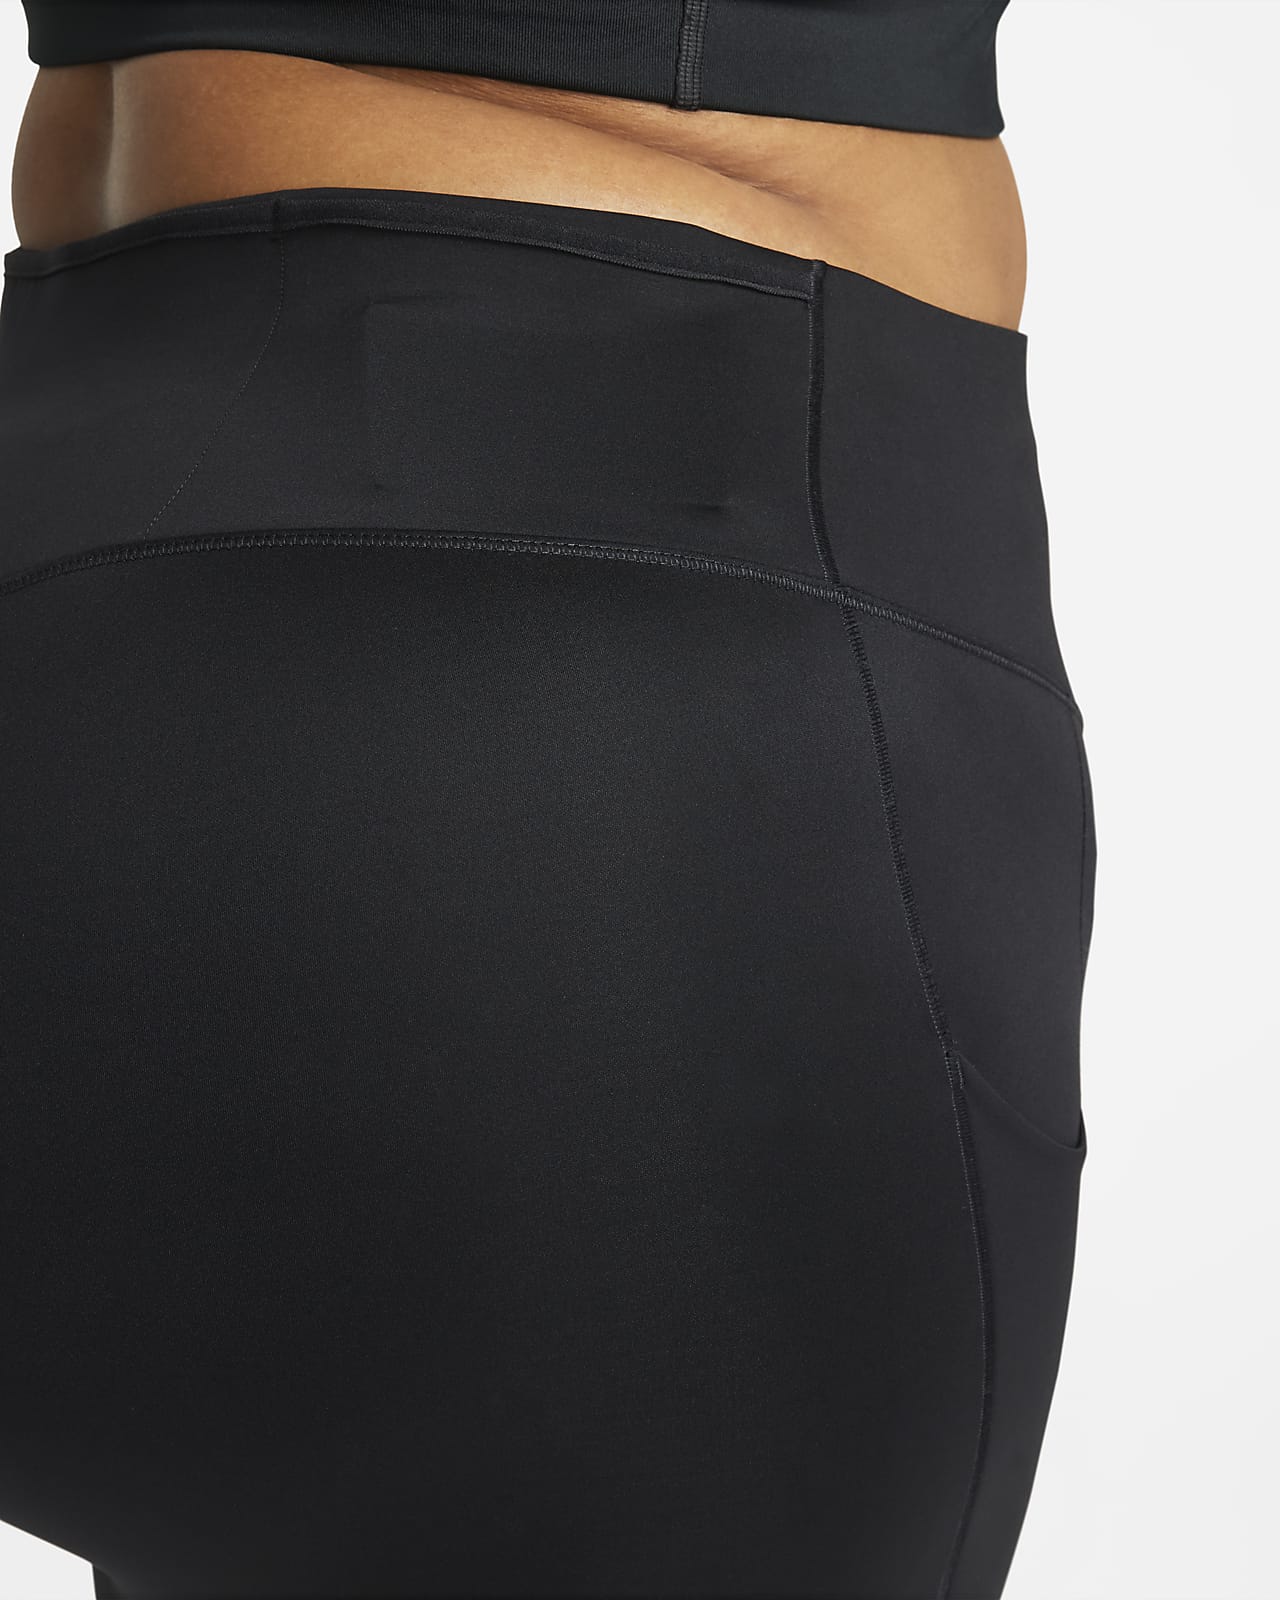 Nike Go Women's Firm-Support Mid-Rise 7/8 Leggings with Pockets. Nike CA